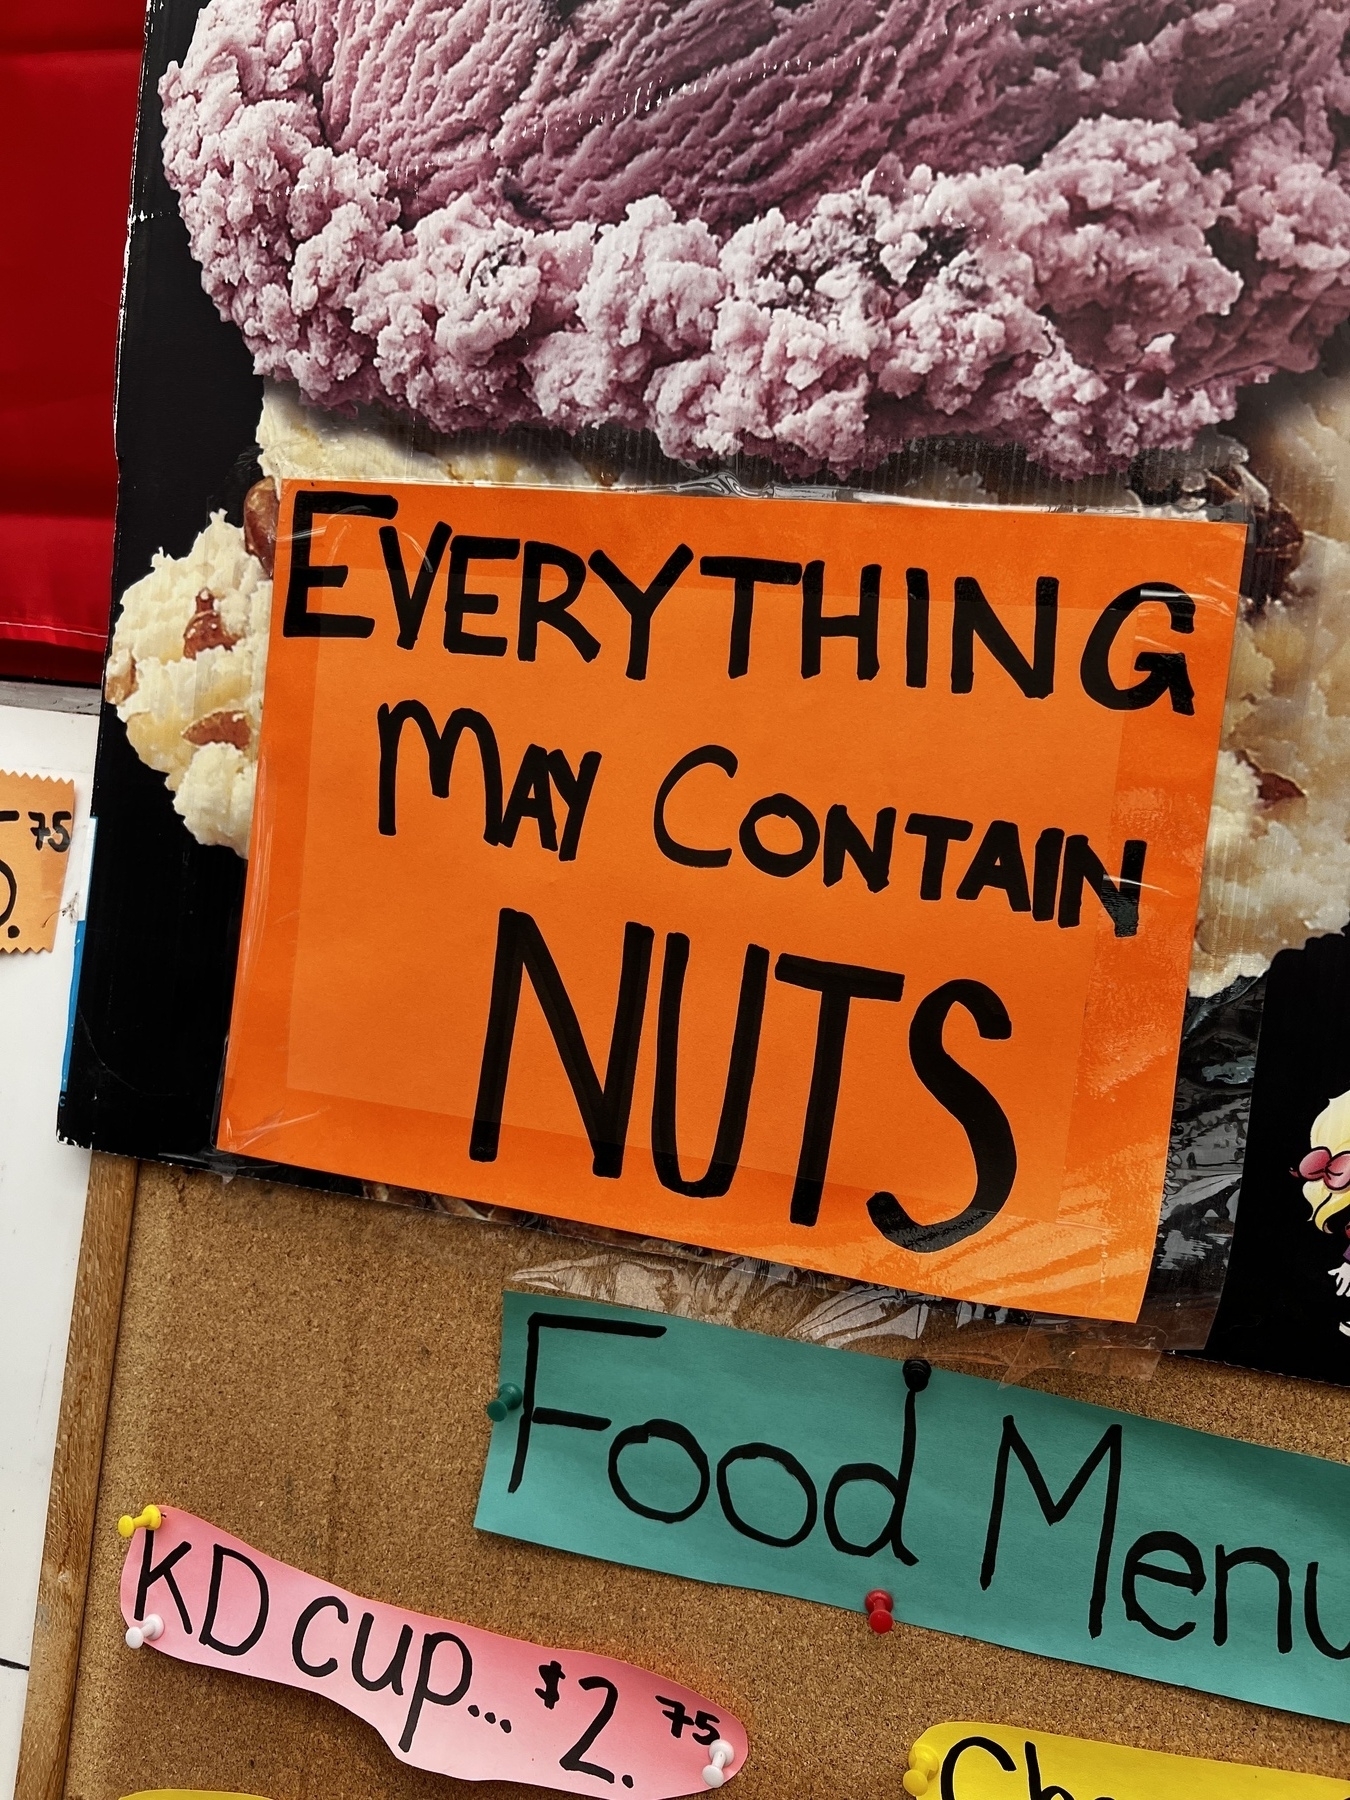 Sign from a ice cream shop that reads “everything may contain nuts”